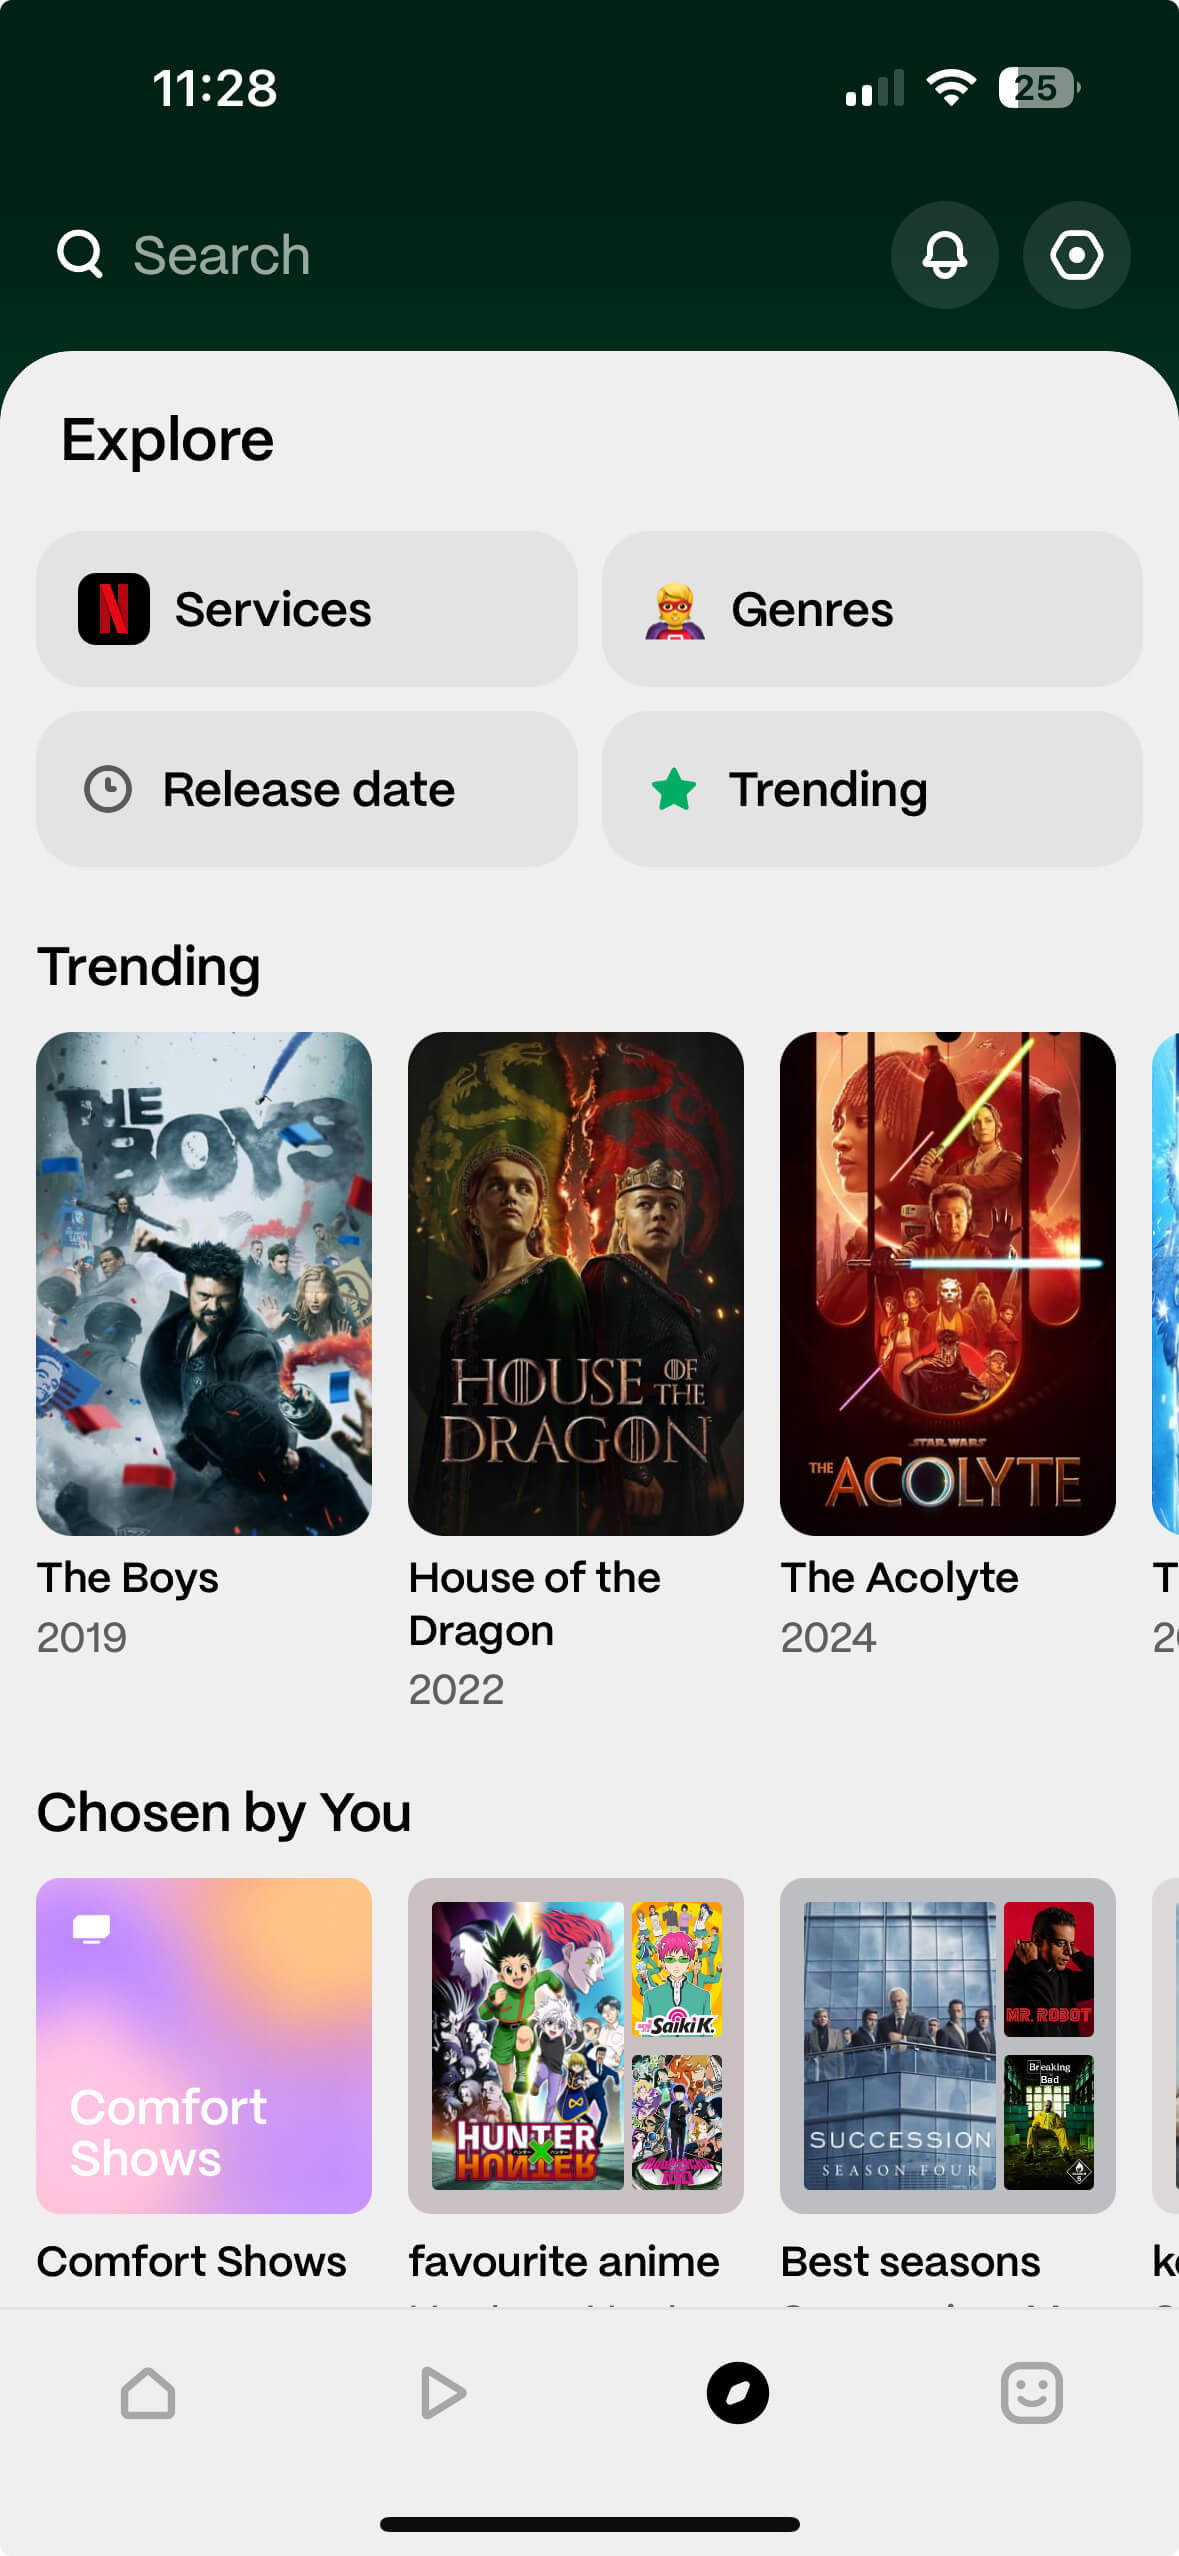 The Explore screen of Marathon's iOS app, showing a list of trending shows and filters for service, genre, and release date.